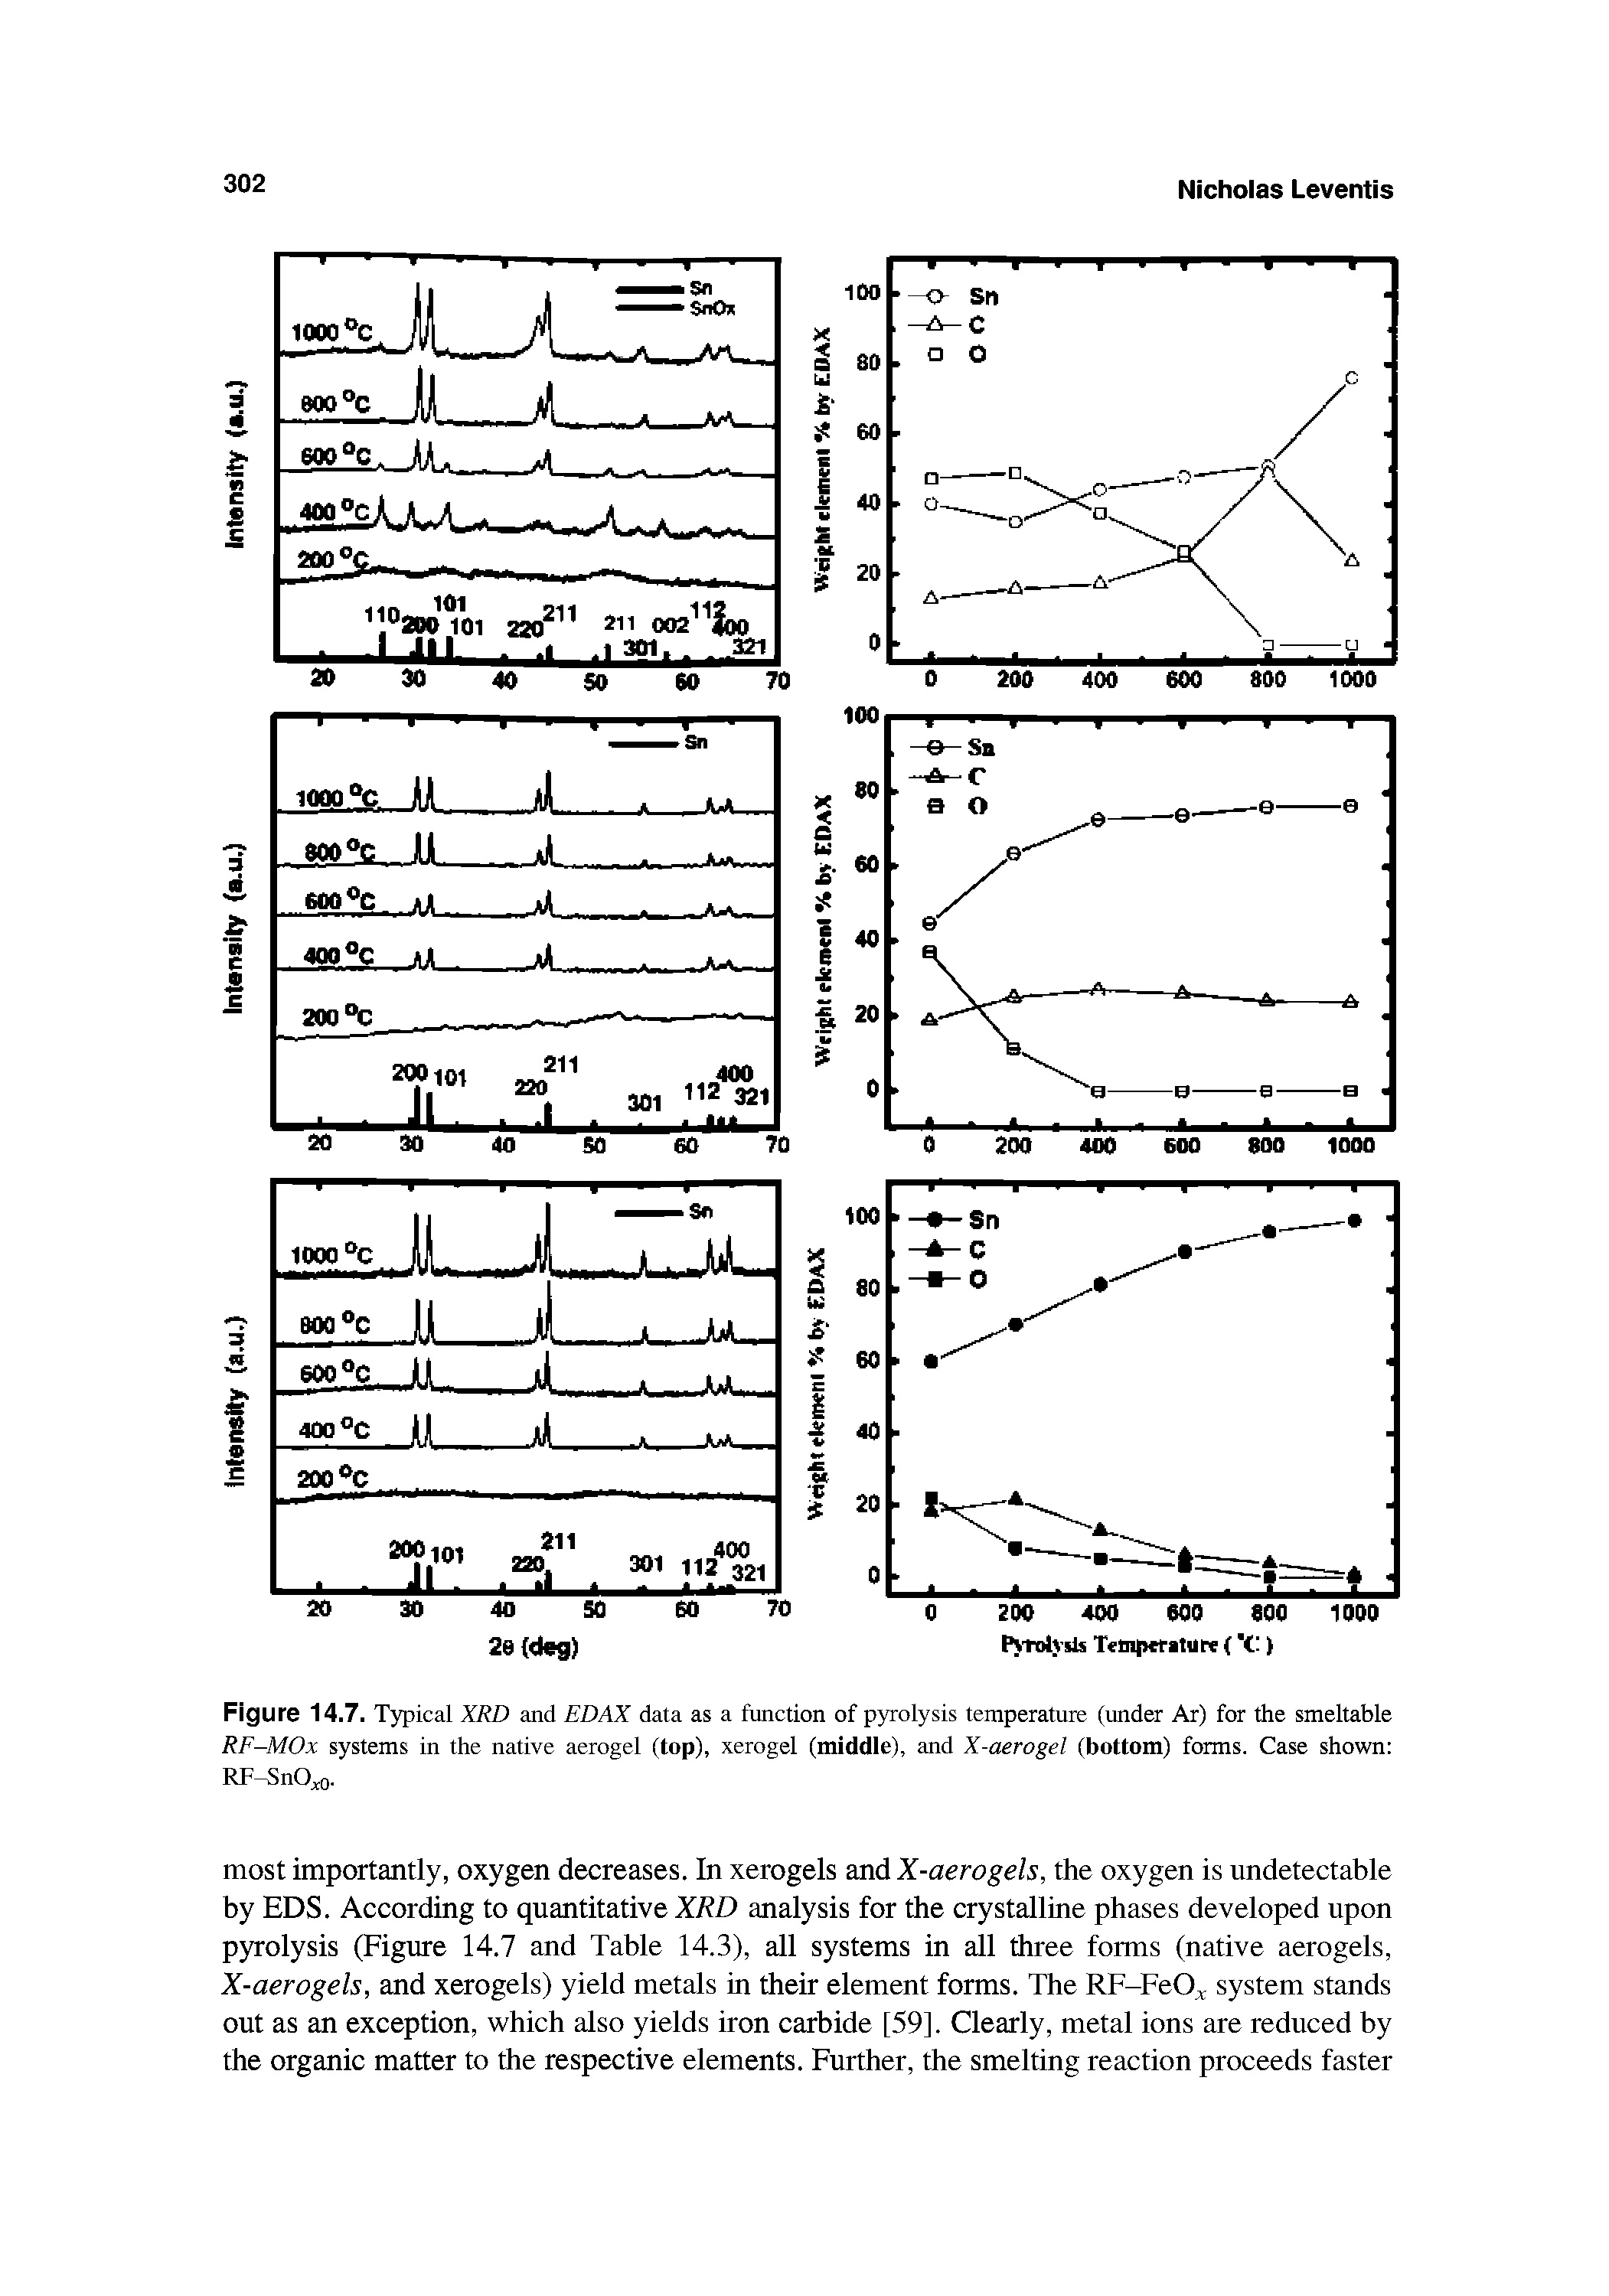 Figure 14.7. Typical XRD and EDAX data as a function of pyrolysis temperature (under Ar) for the smeltable RF-MOx systems in the native aerogel (top), xerogel (middle), and X-aerogel (bottom) forms. Case shown RF-SnO to.